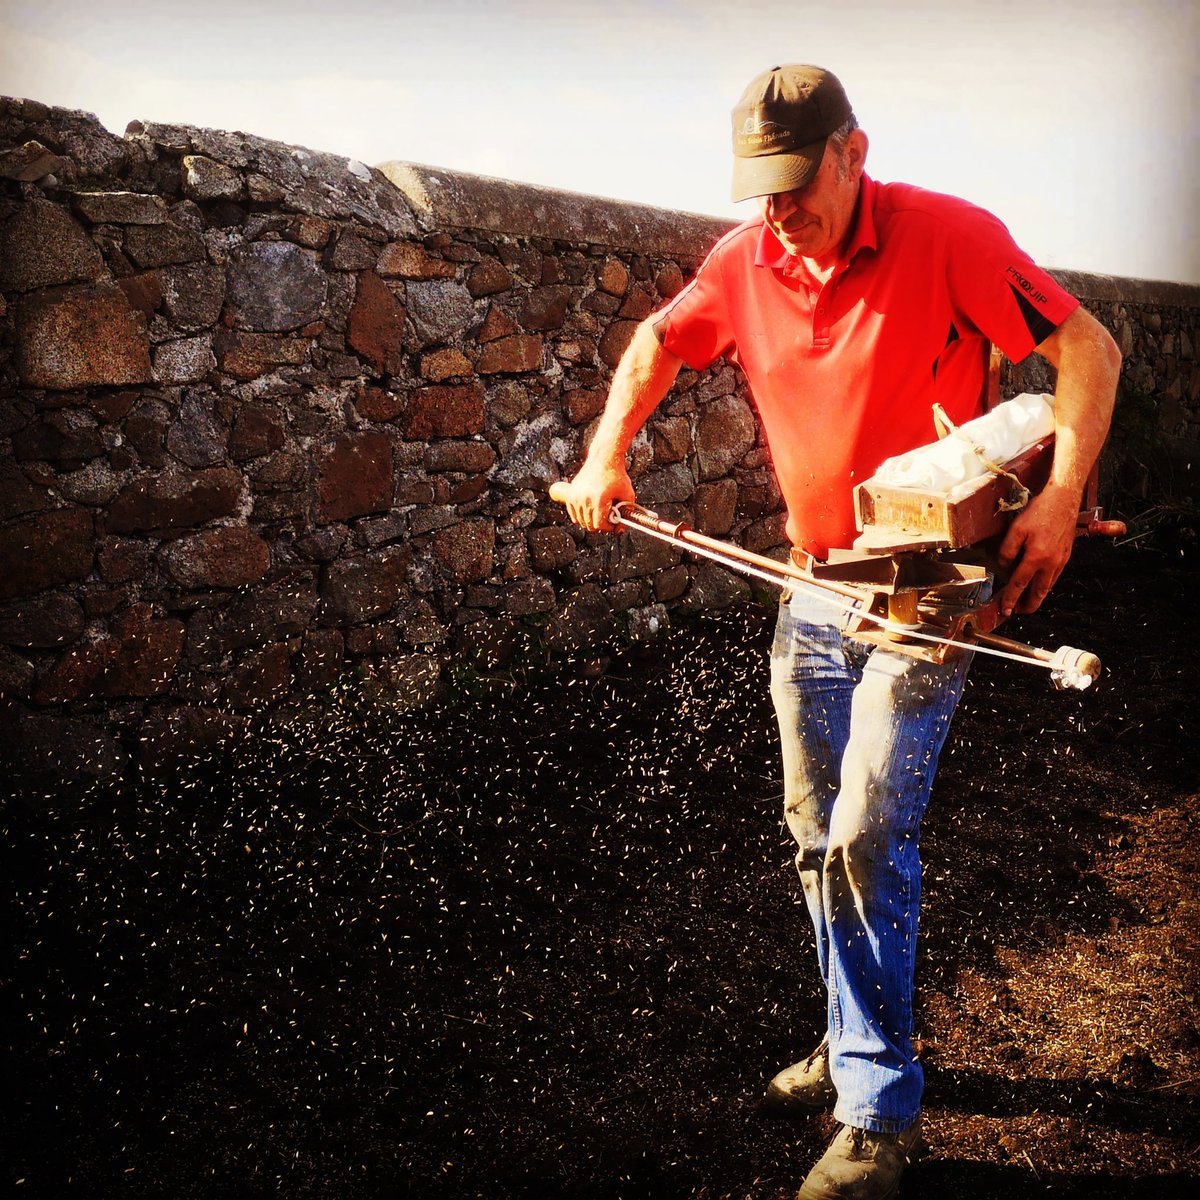 The old ways are often the best ways! Here's Dermot in action sowing grass seed by the lighthouse visitor centre with a 'fiddle'! #wildatlanticway @Sust_Travel_Ire @gtlighthouses @IrishCountryMag @IrishCountryLiv @turtlebunbury #donegal @govisitdonegal @Donegalcomuseum